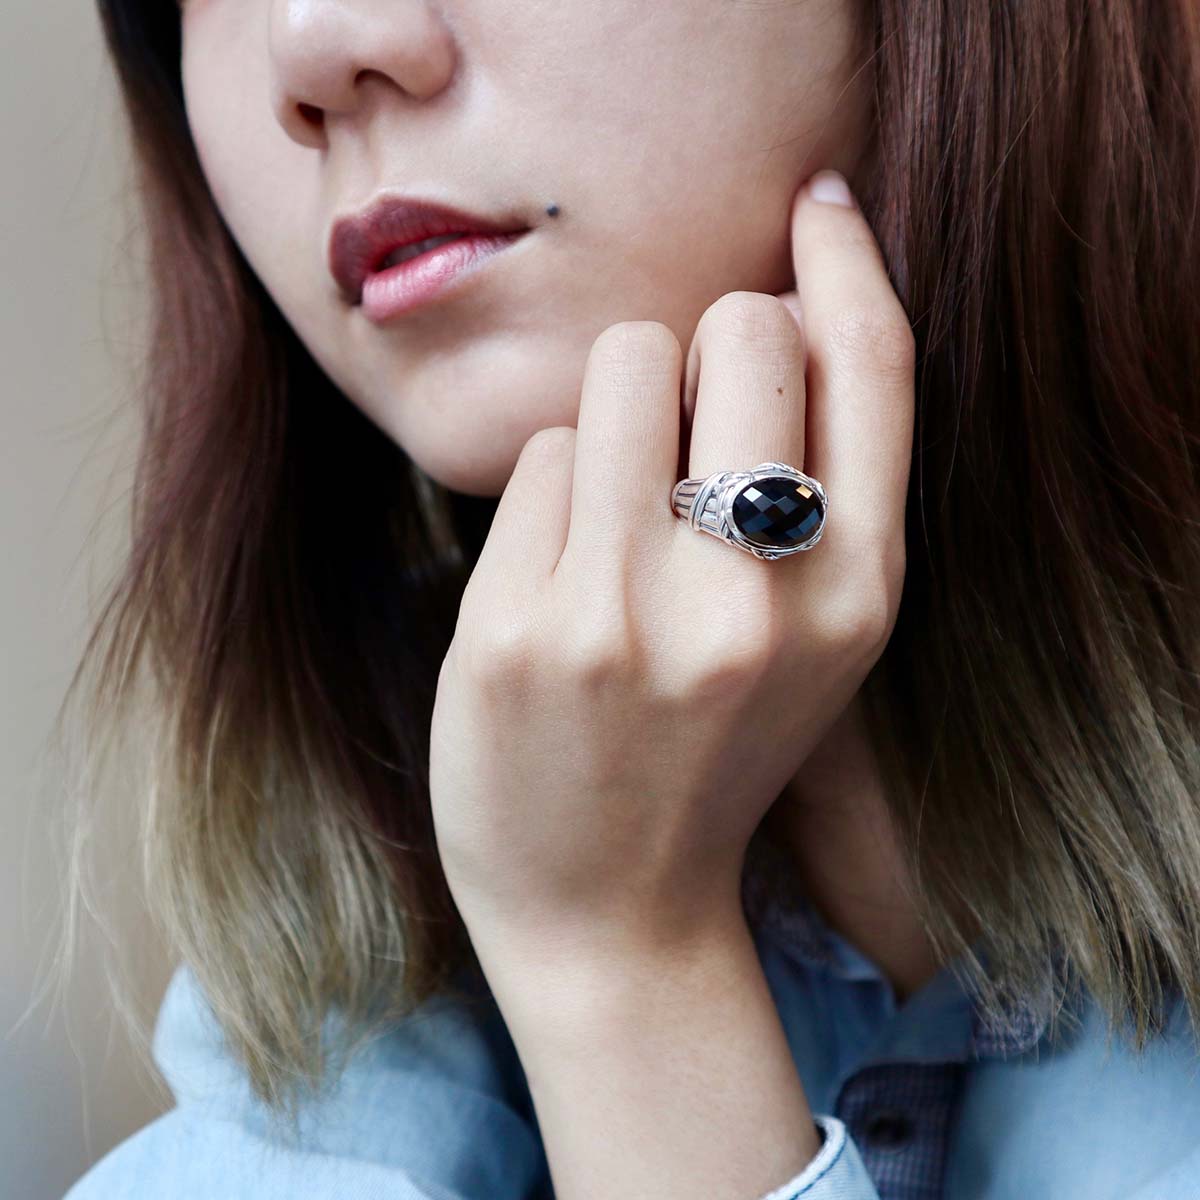 Reflections Statement Ring in sterling silver with black onyx